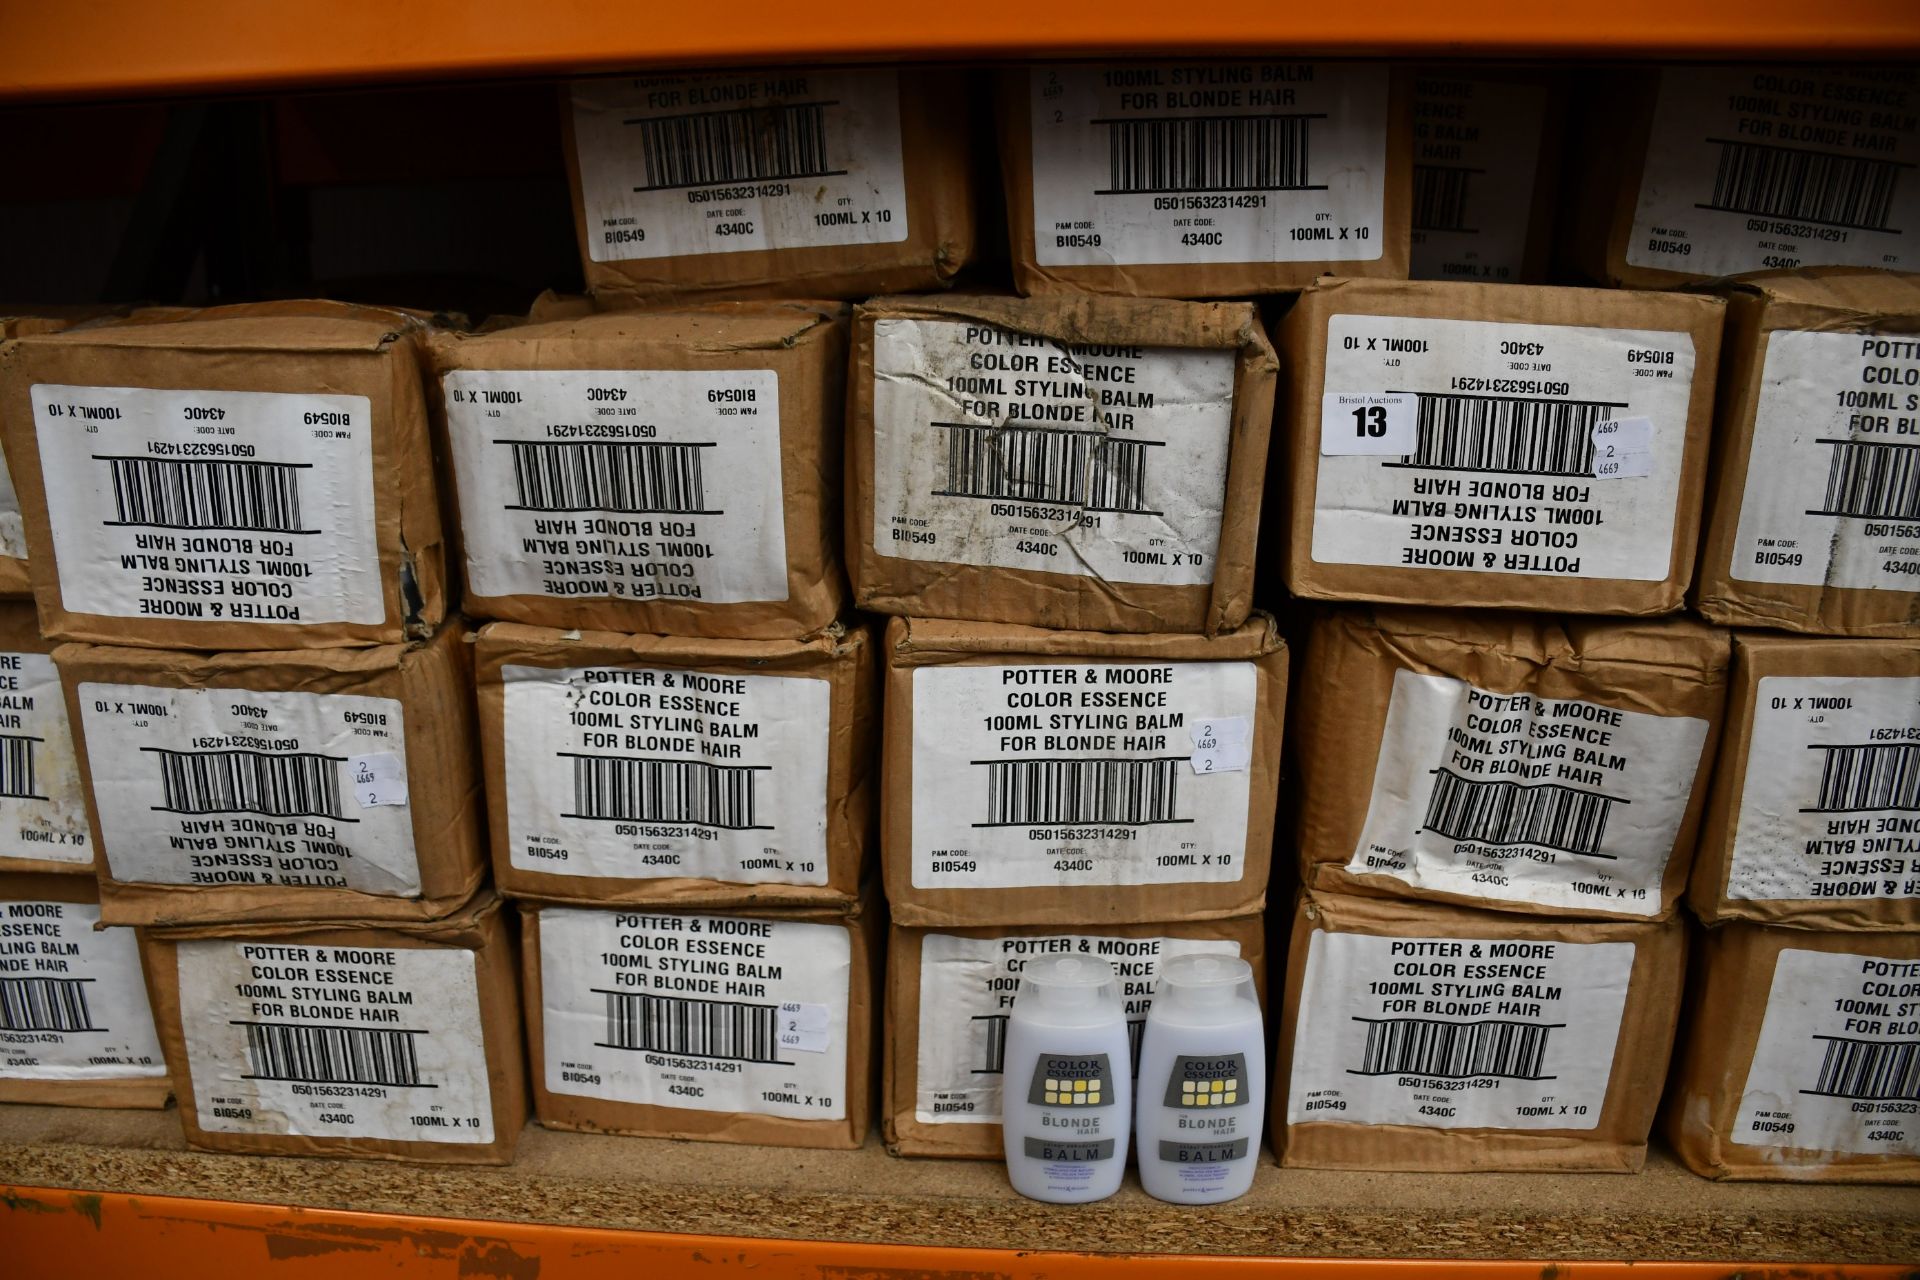 Ninety six boxes of Potter&Moore colour essence for blonde hair (Ten in a box) (100ml).